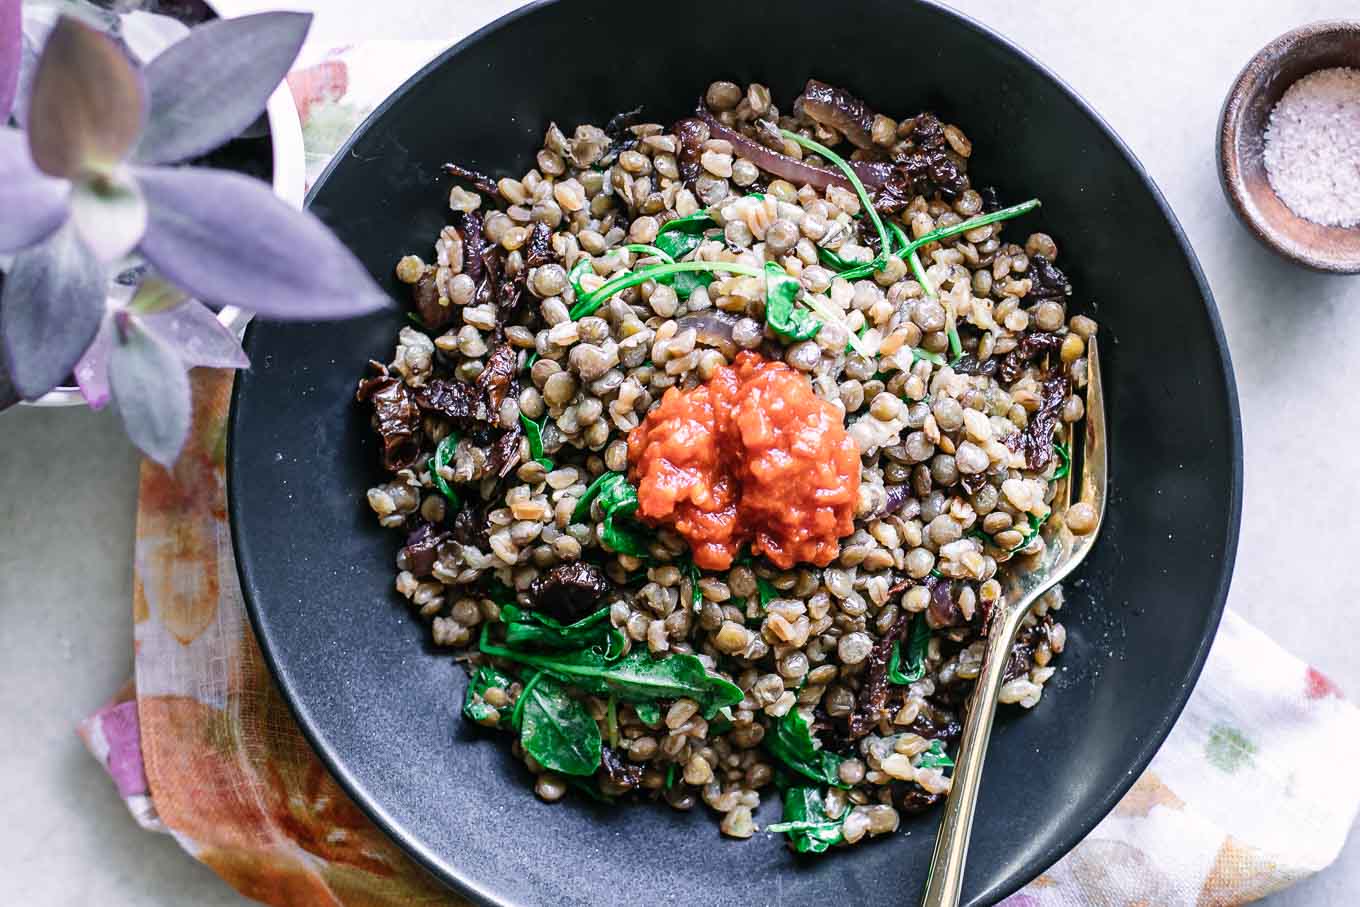 a bowl of lentils and farro with arugula and red harissa sauce on a white table